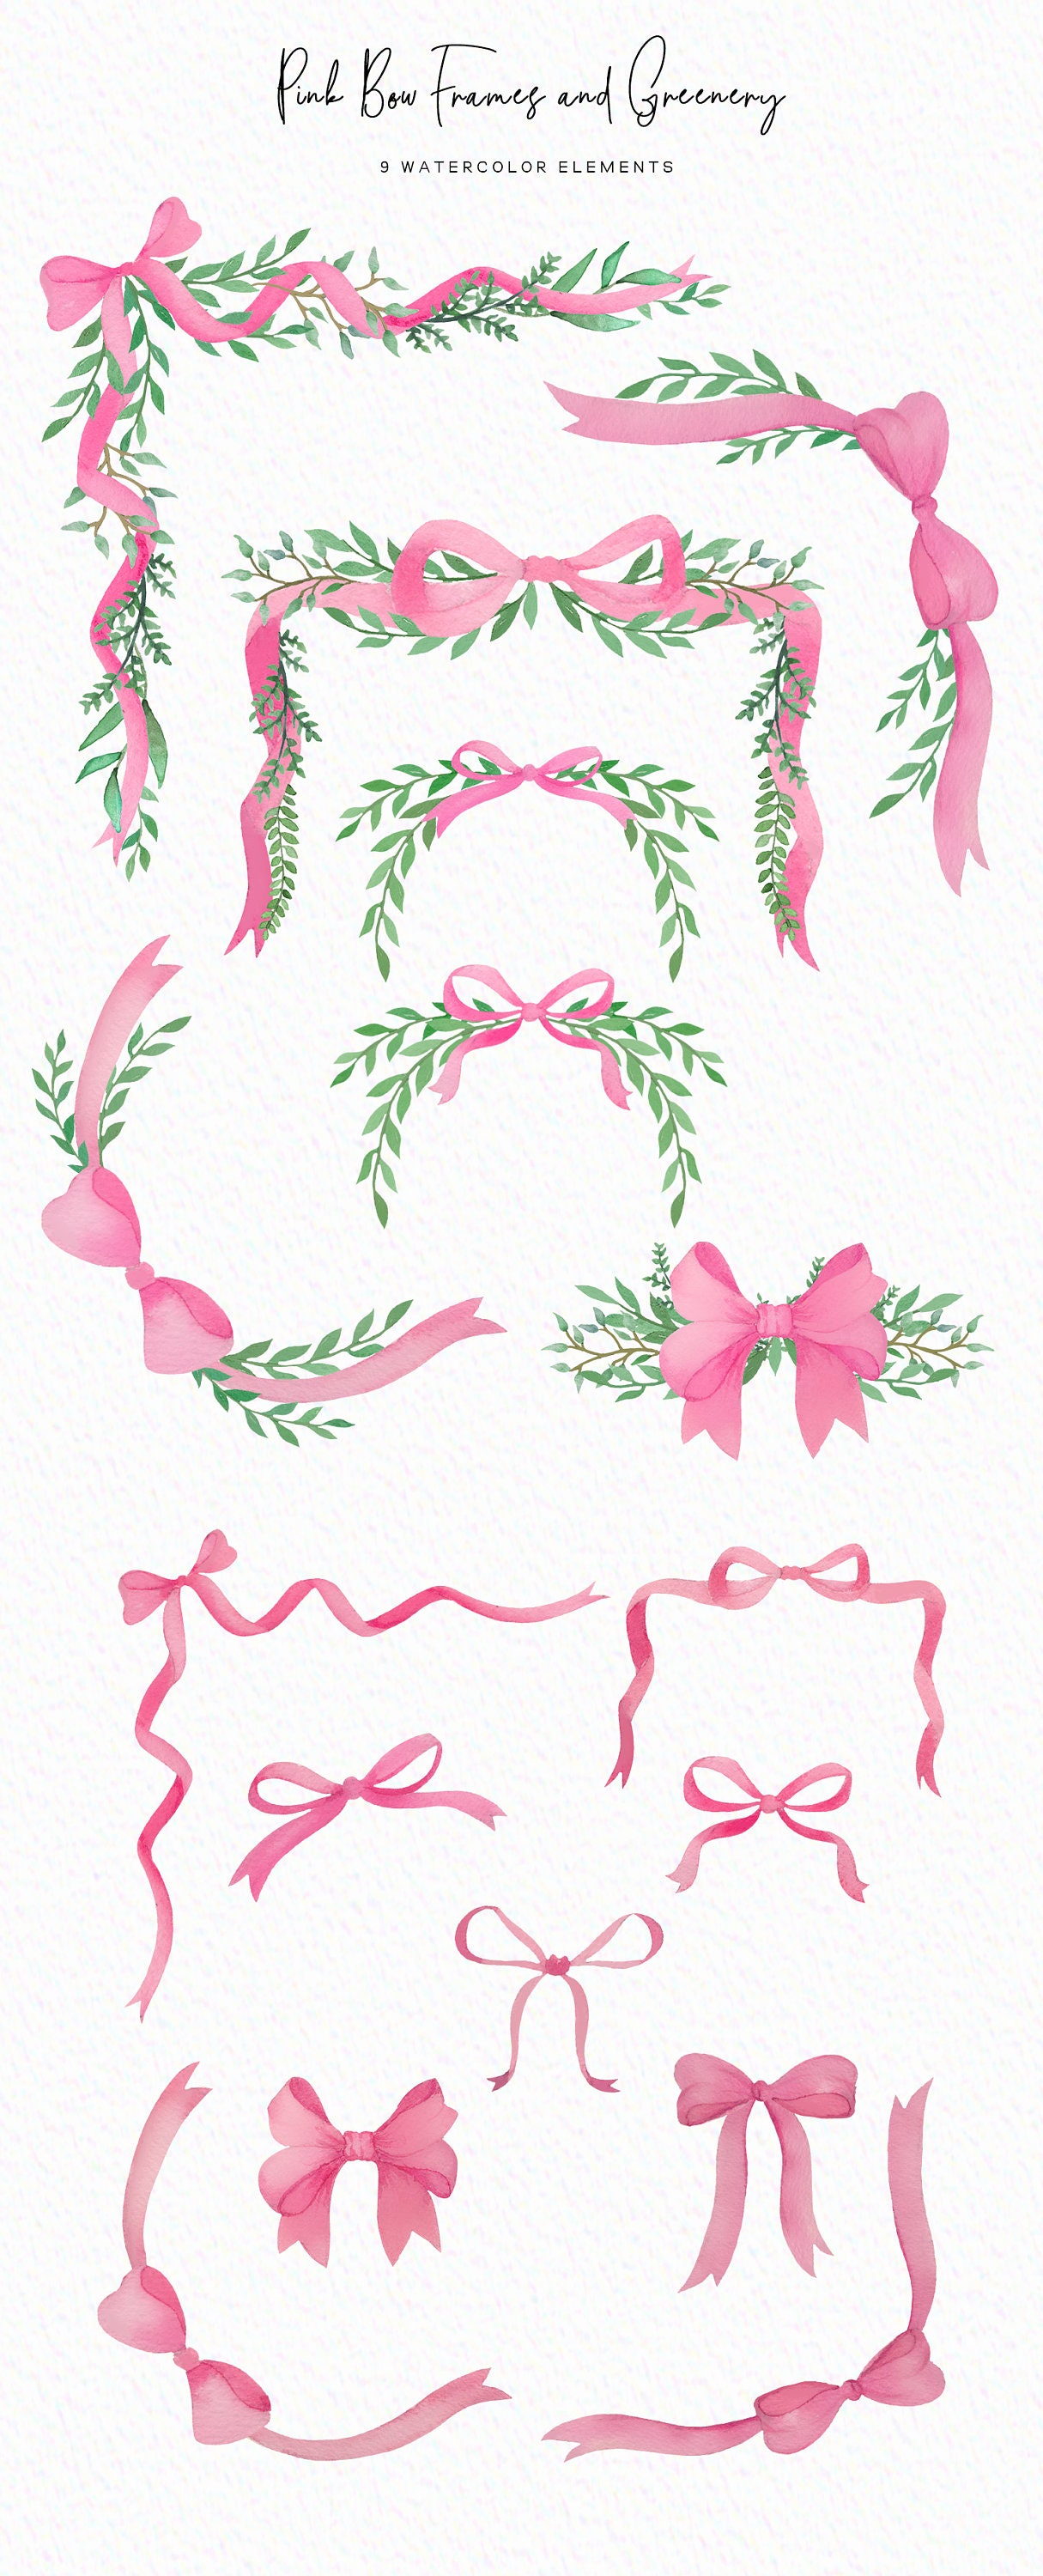 Watercolour Pink Bows Clipart Graphic by Jar of Whimsy · Creative Fabrica